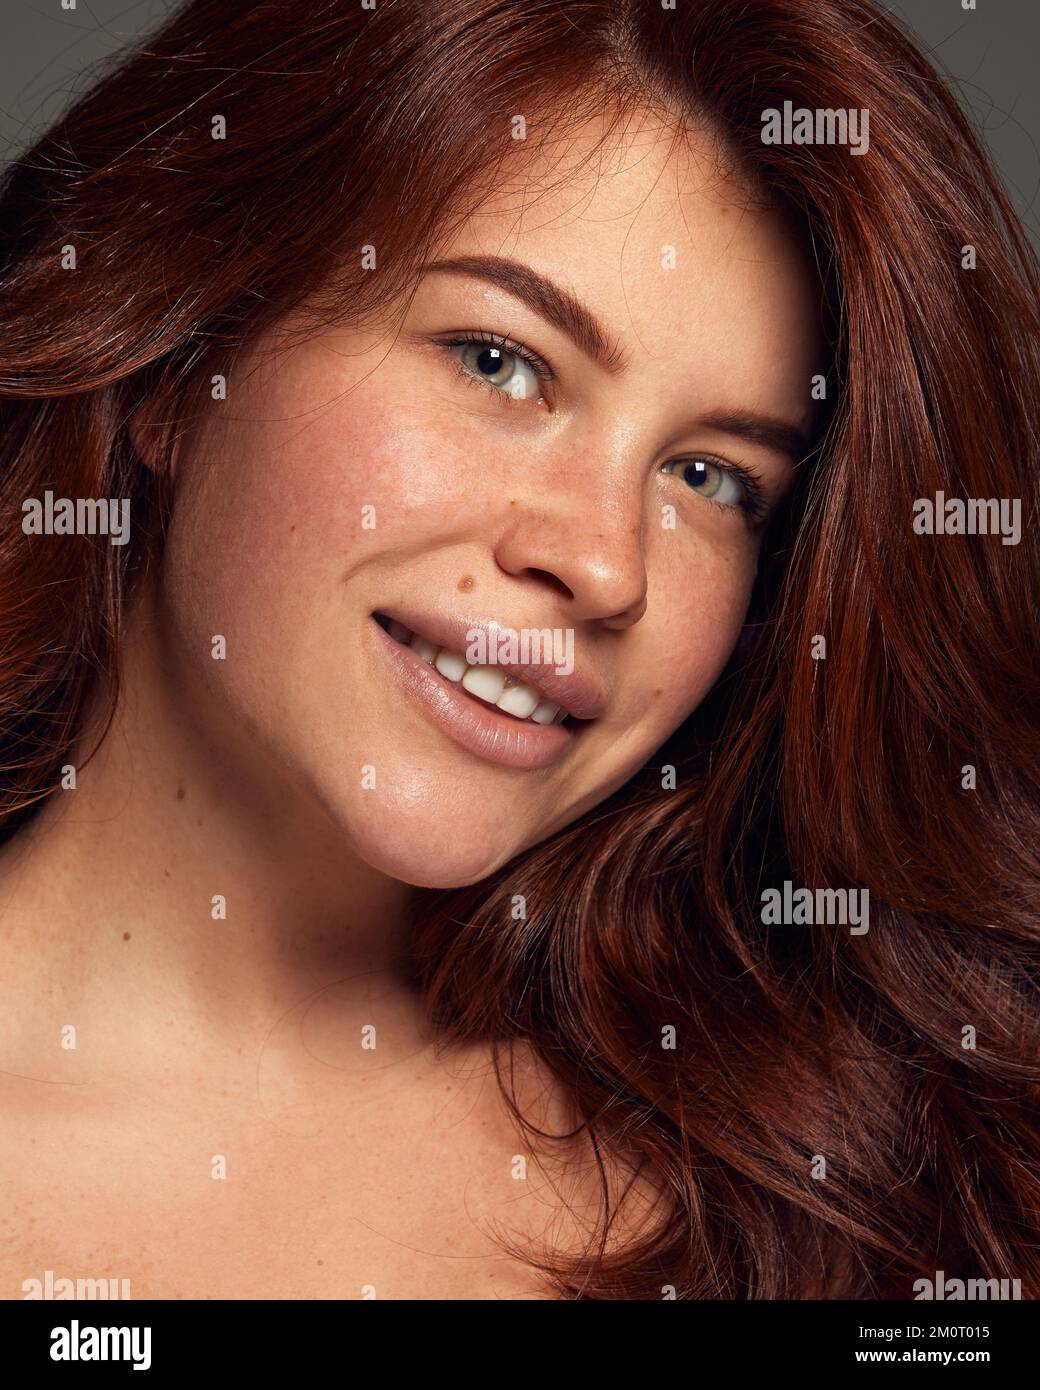 Portrait of young beautiful red-haired woman with perfect natural skin with freckles isolated on dark grey background. Glossy wavy hair Stock Photo